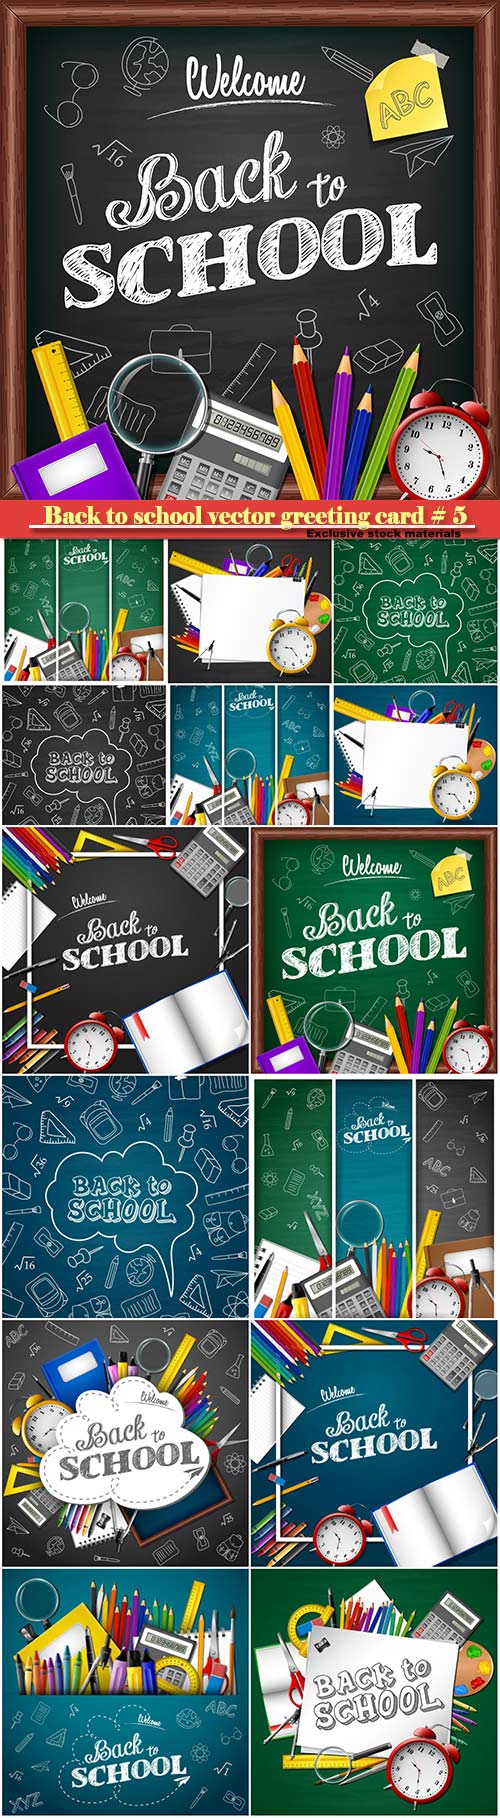 Back to school vector greeting card # 5